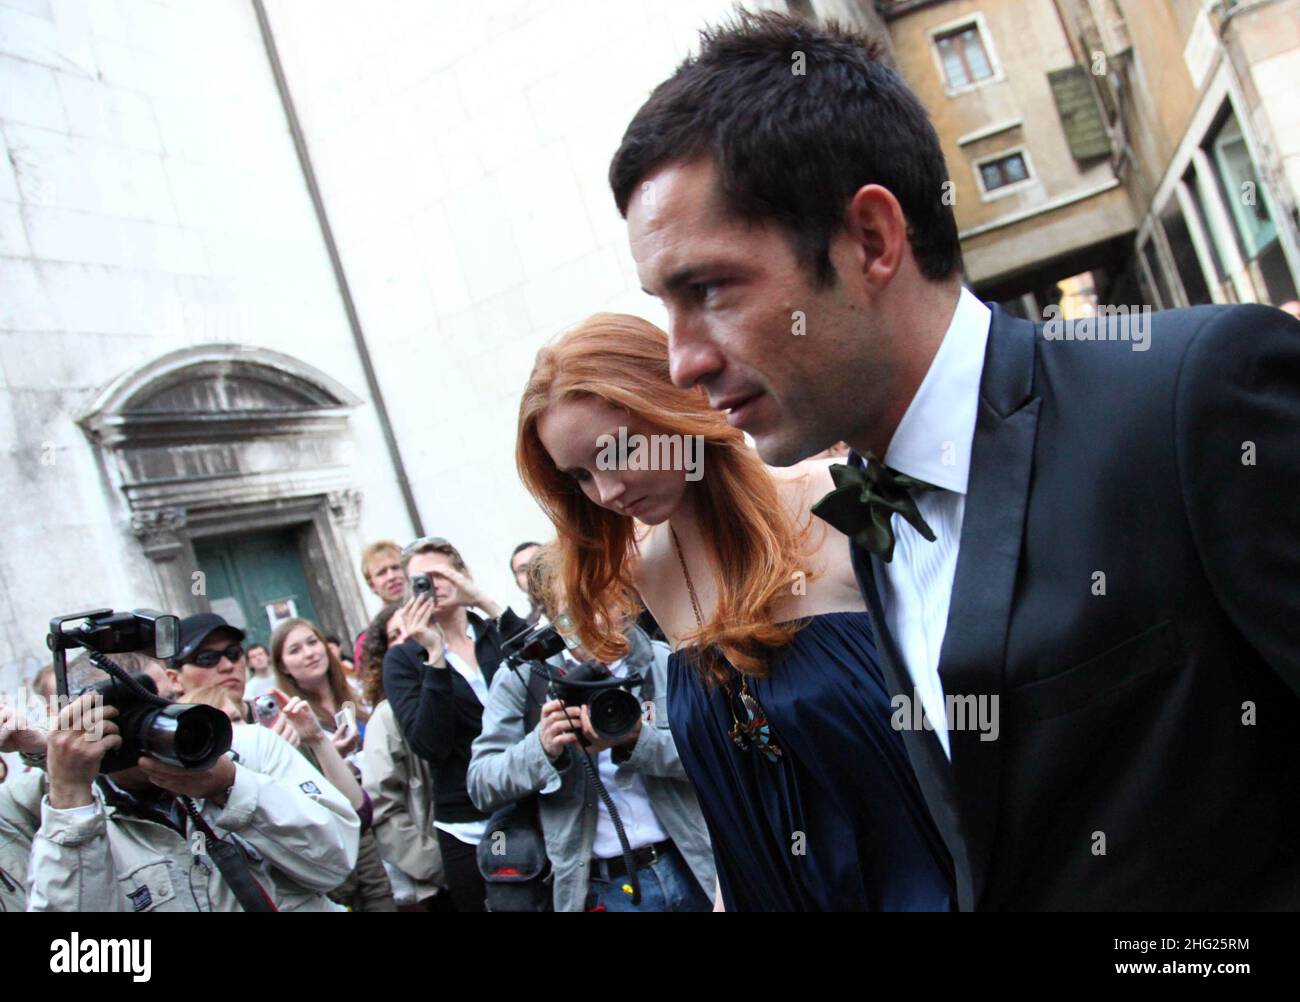 English model Lily Cole and actor Enrique Murciano arrive for the wedding ceremony of actress Salma Hayek and businessman Francois-Henri Pinault at the 'La Fenice' Theatre, in Venice, Italy on Saturday, April 25, 2009. Stock Photo